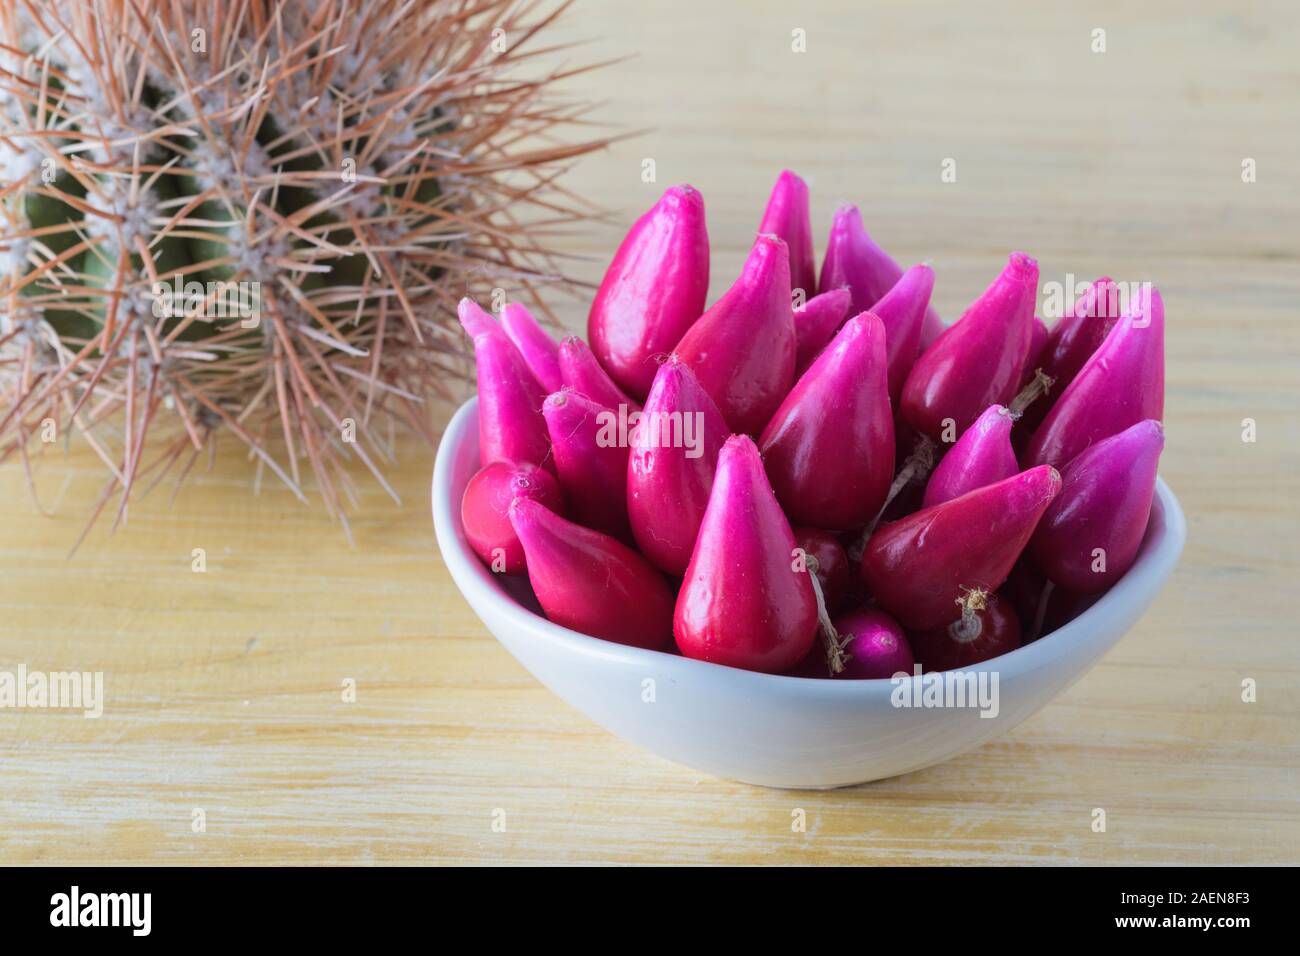 Pitiguey fruit group in white bowl on wood table with Cactus. Stock Photo